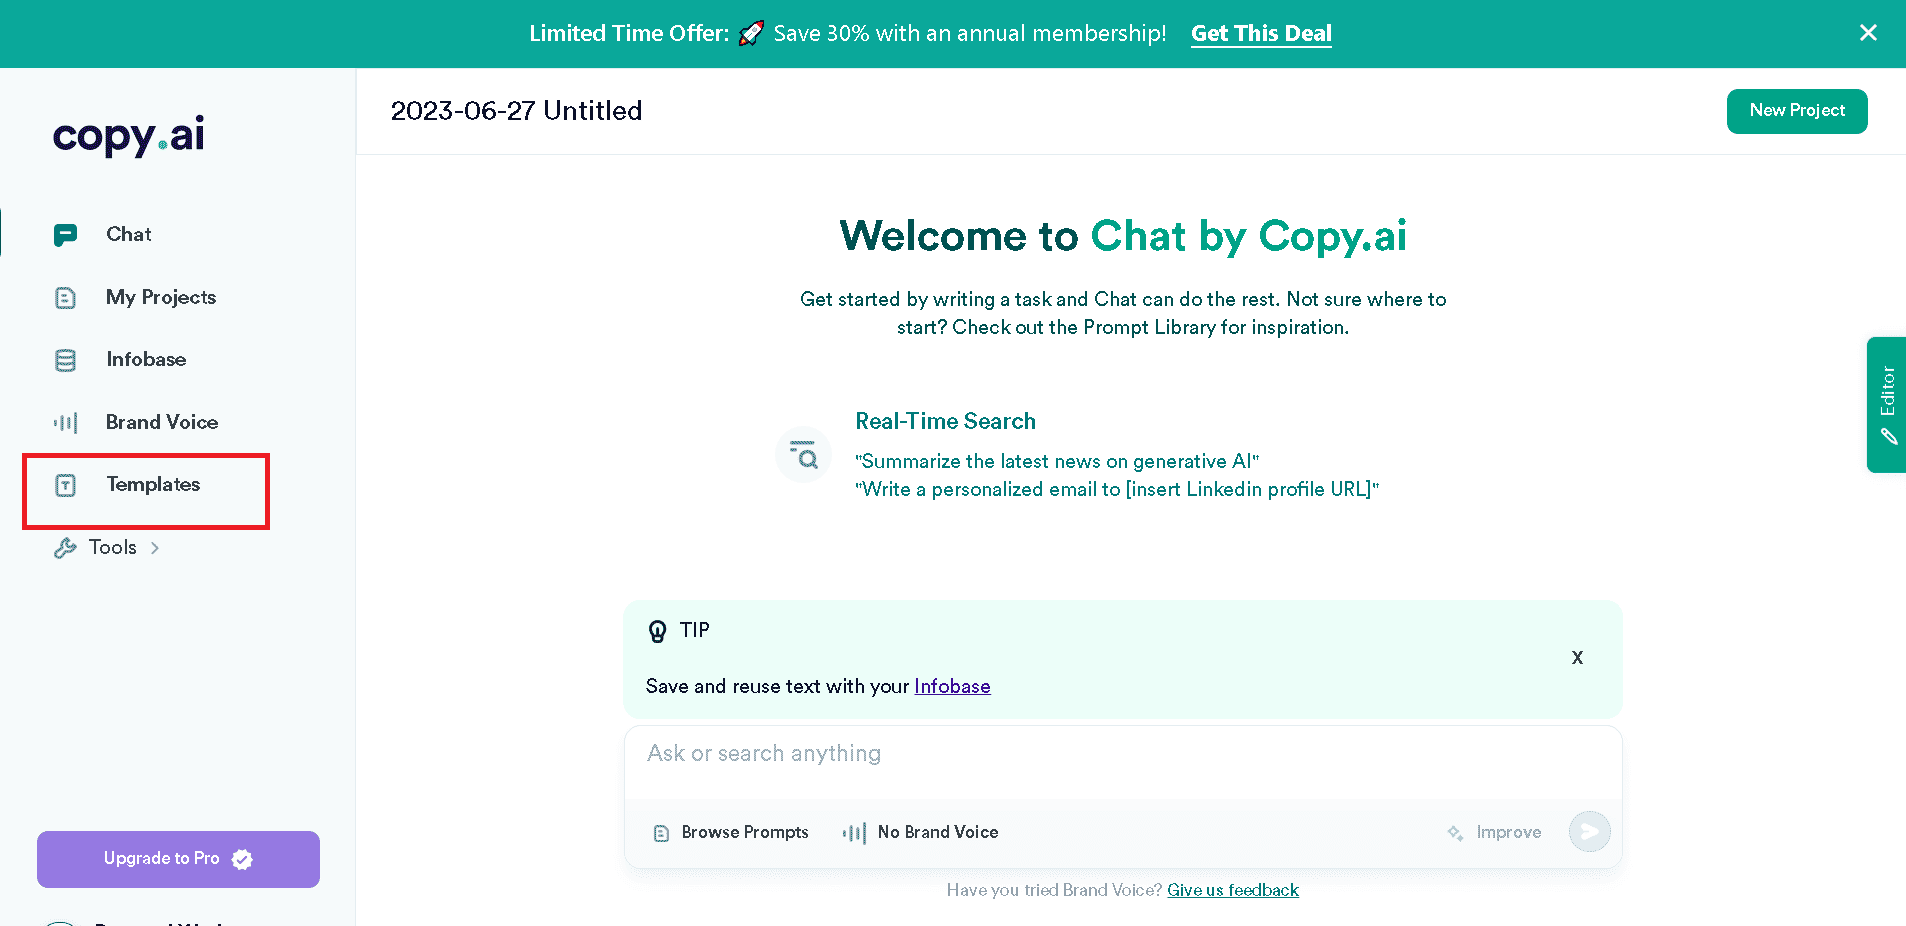 Access the CopyAI chat templates in the left sidebar inside the dashboard